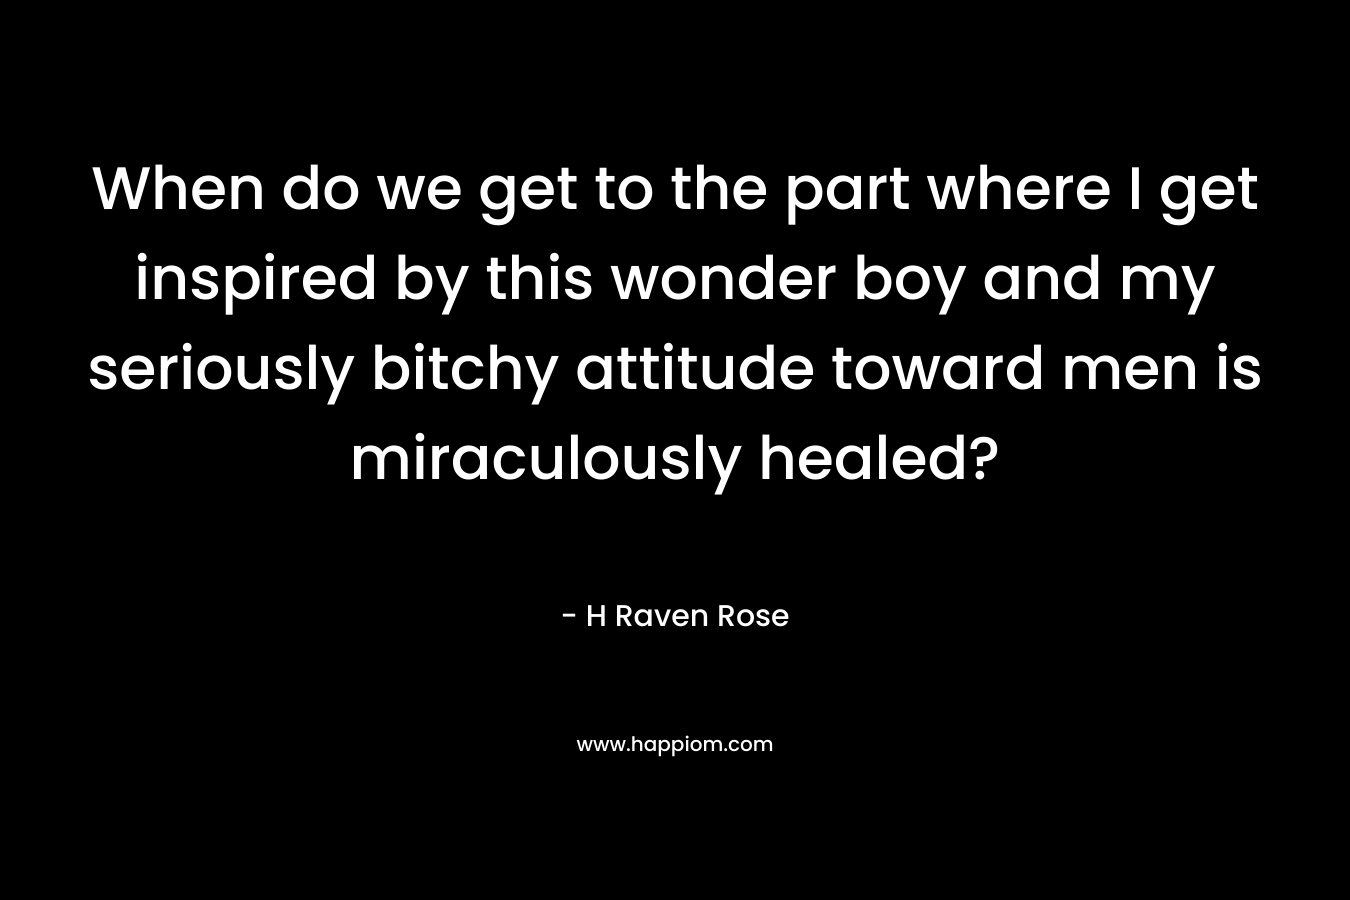 When do we get to the part where I get inspired by this wonder boy and my seriously bitchy attitude toward men is miraculously healed? – H Raven Rose